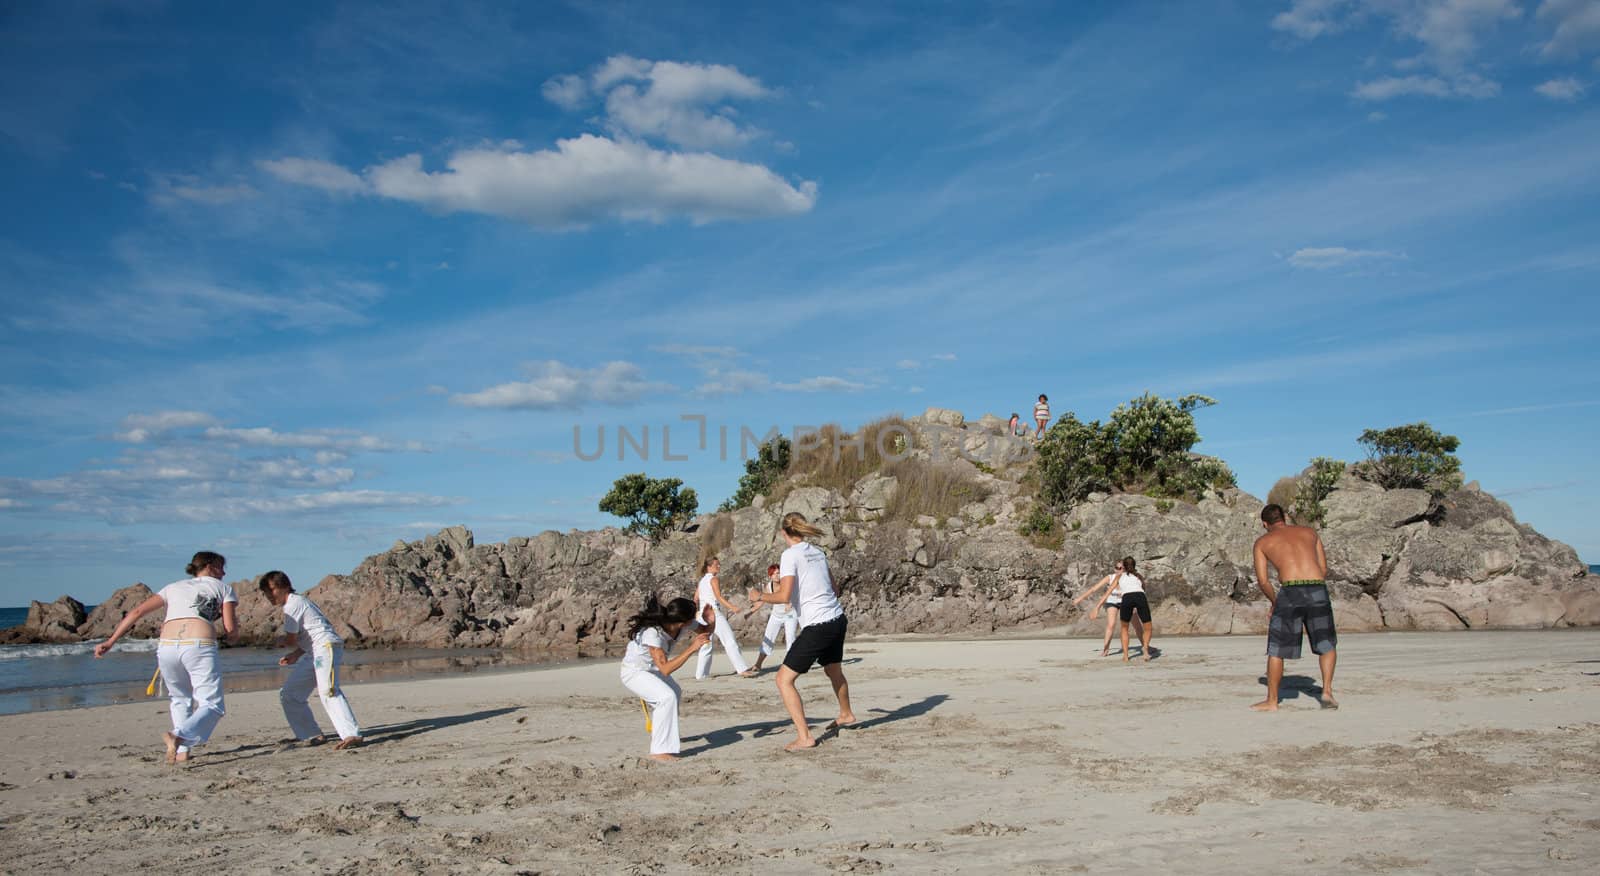 TAURANGA, NEW ZEALAND - JANUARY 23: Group of youths practice the art of capoeira on the Mount Maunganui beach, Tauranga New Zealand on January 23 2012. The sport, founded in Brazil is growing globaly.